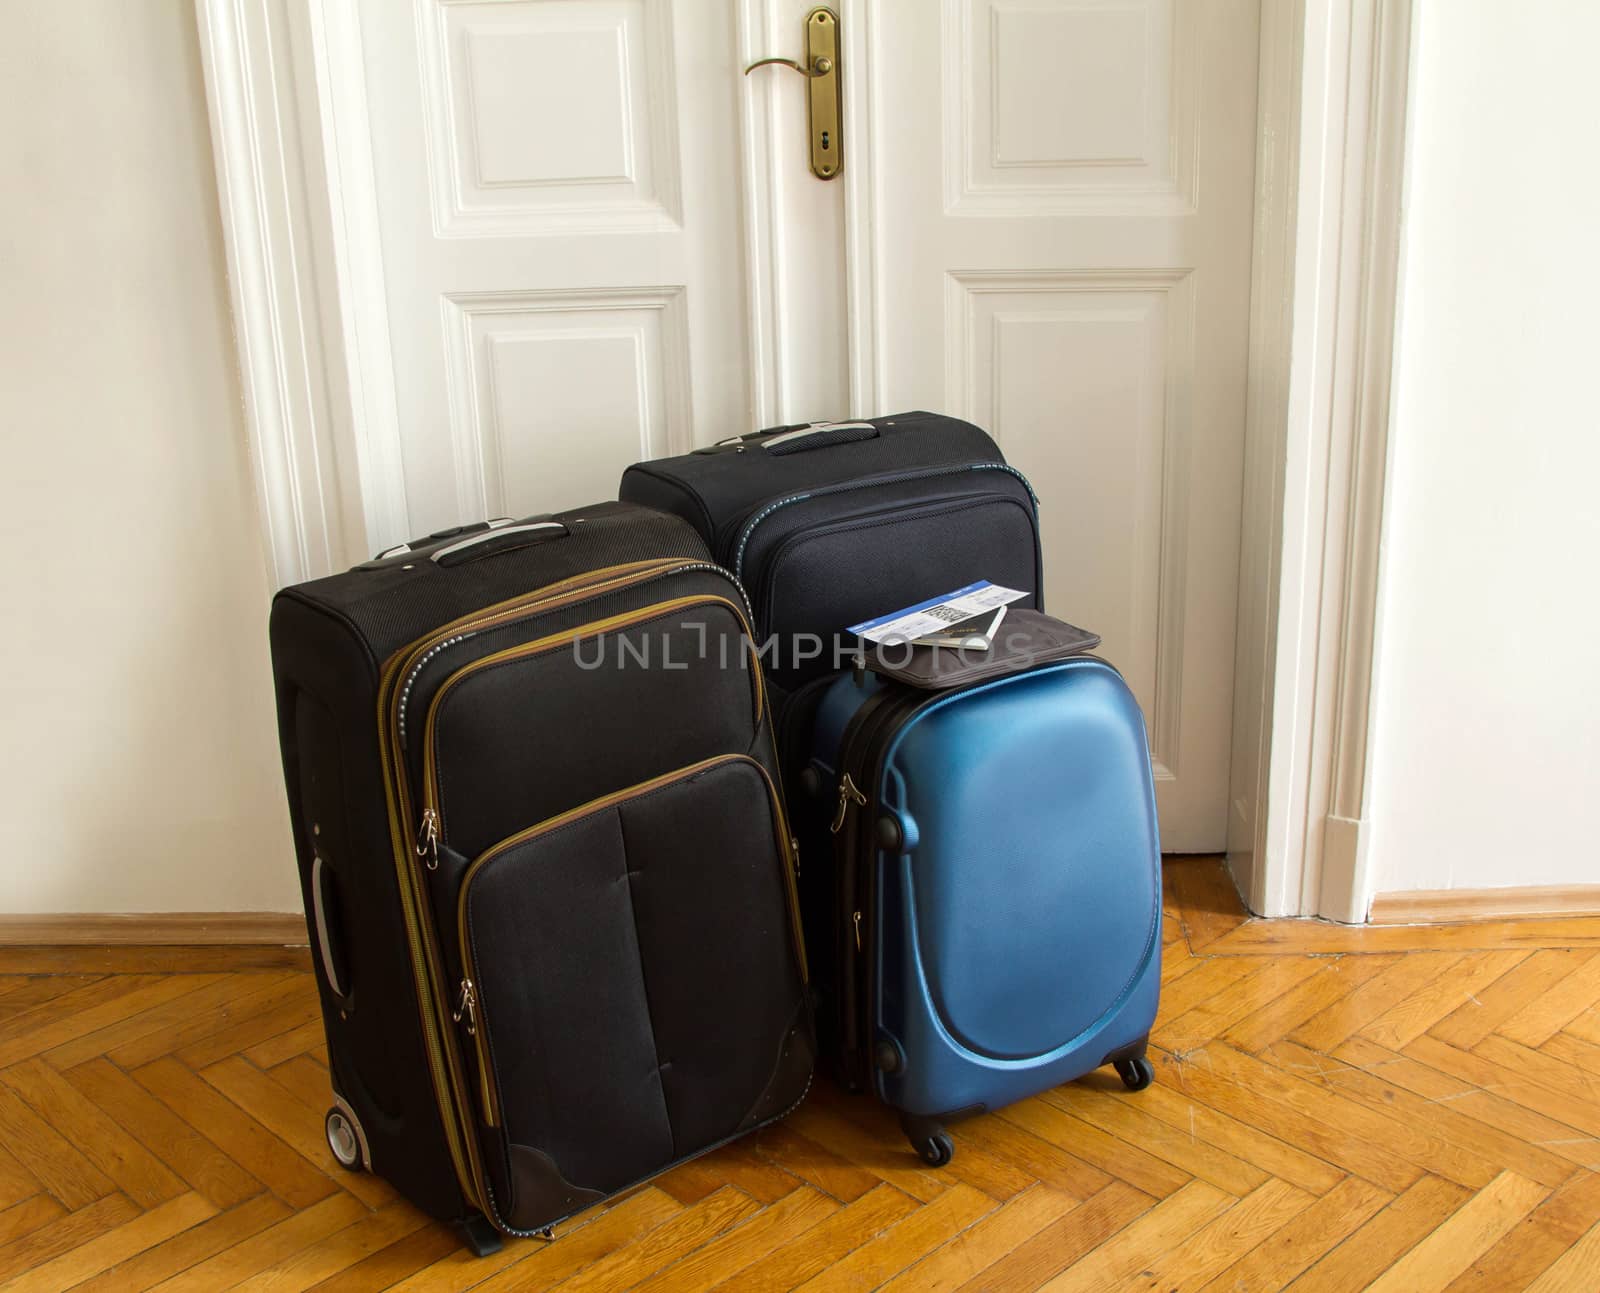 Airline ticket, passport and luggage, ready to travel
